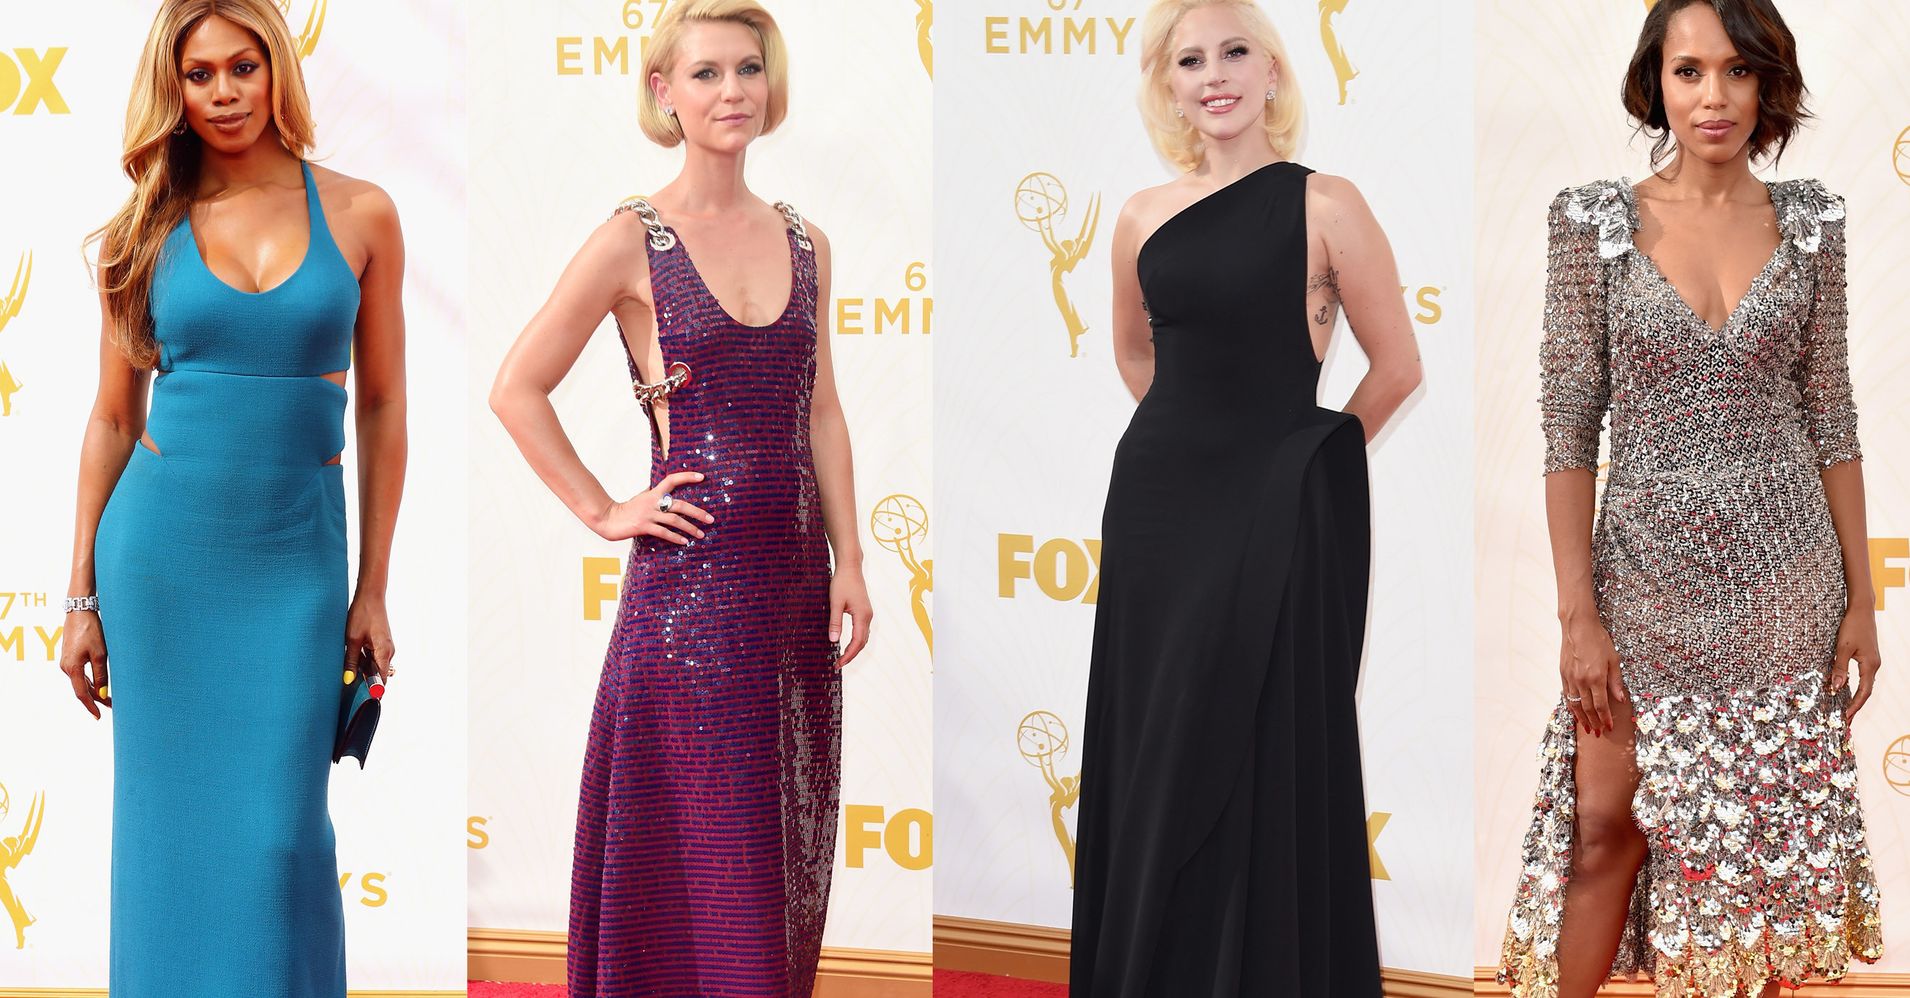 The Emmys Best Dressed List Is Full Of Surprises HuffPost